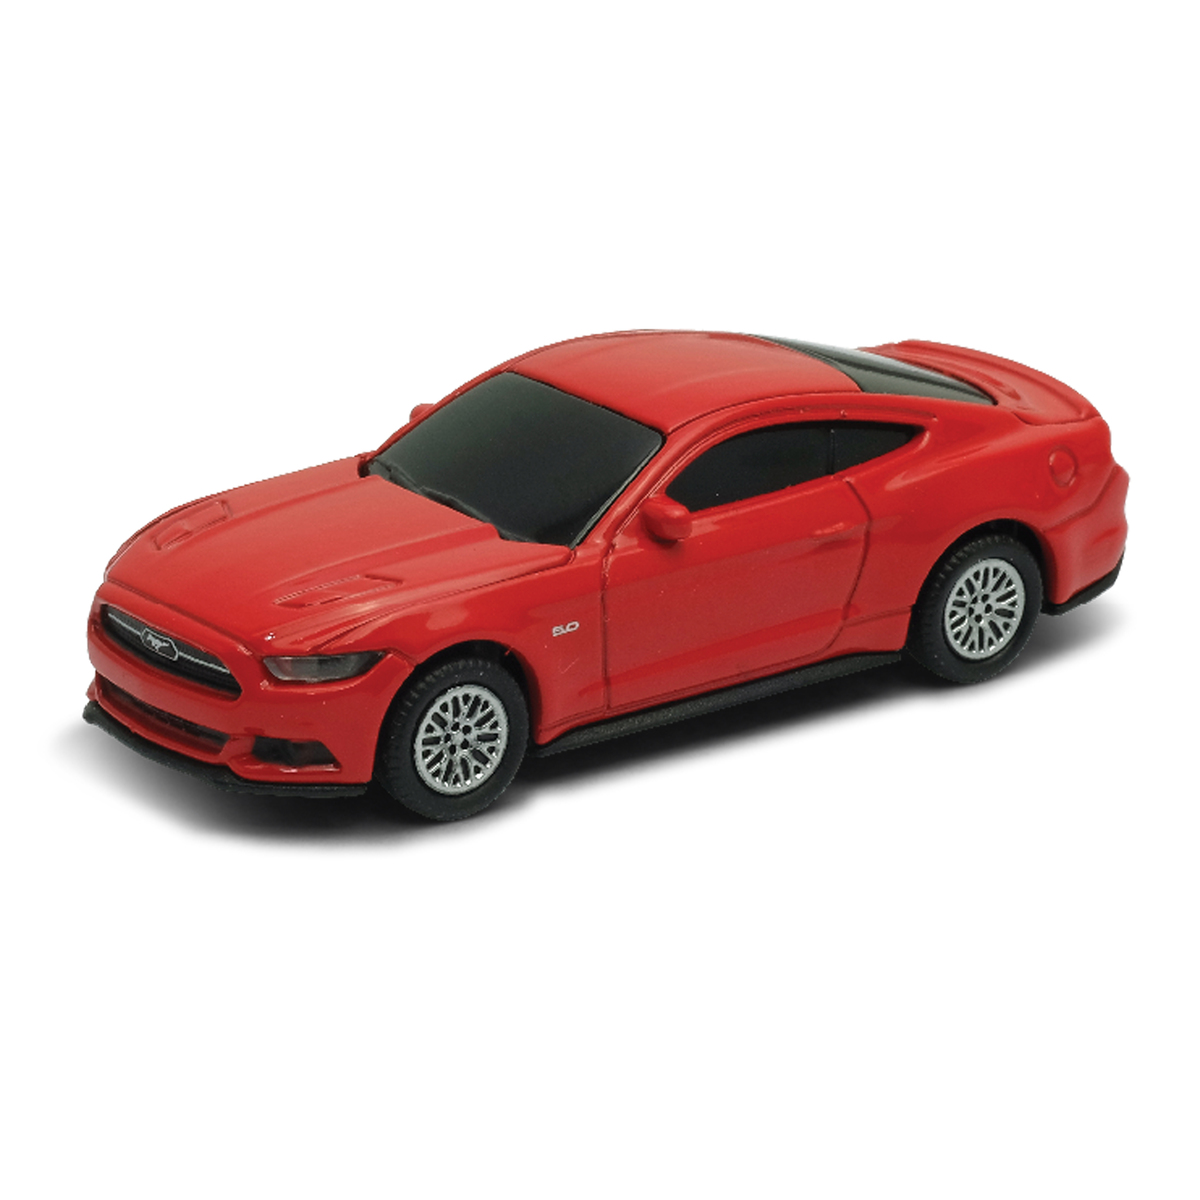 LM USB-Speicherstick Ford Mustang 1:72 RED 16GB rot